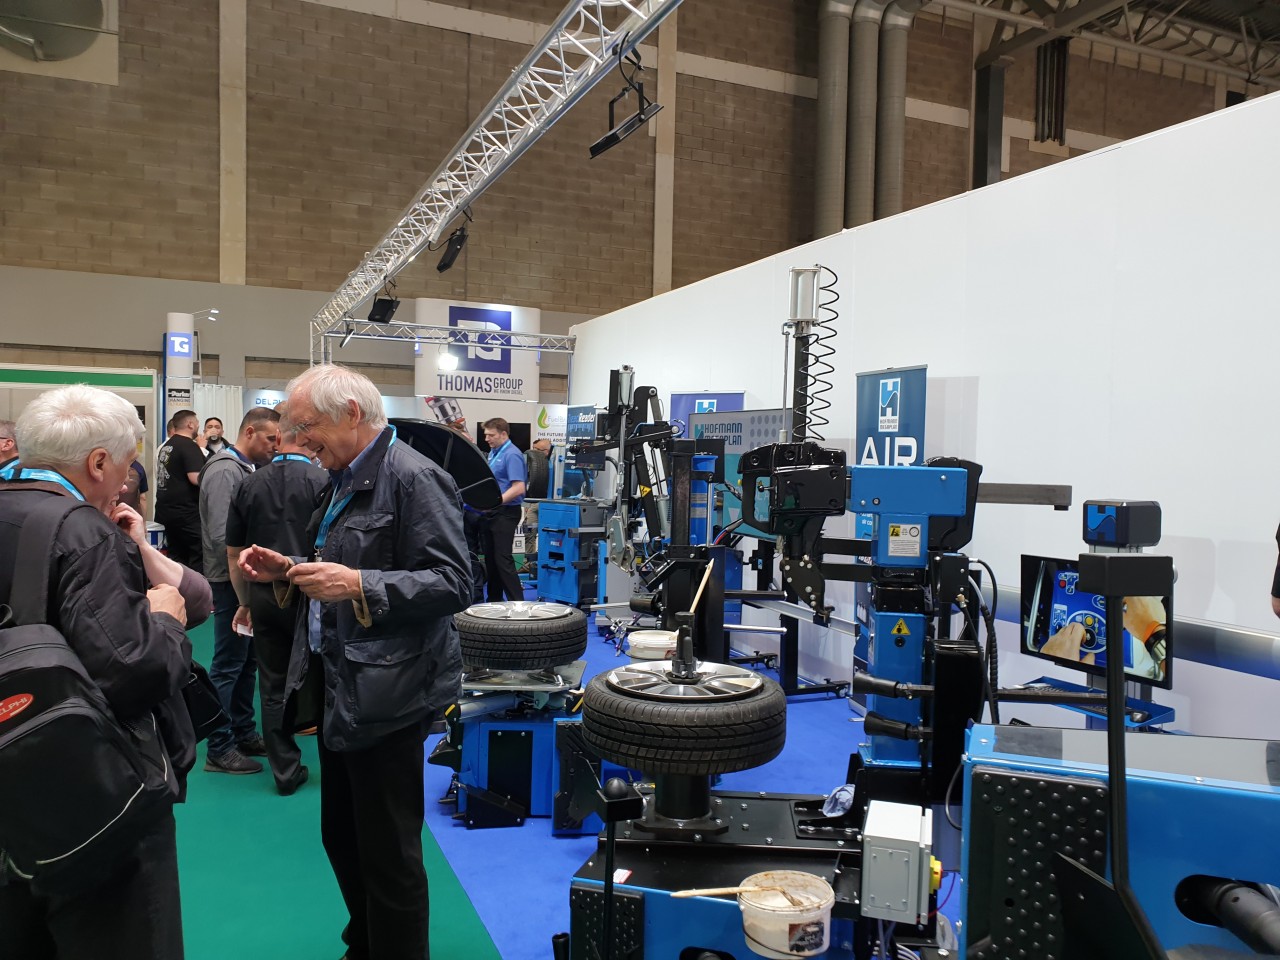 Automechanika 2019 show is in full swing at the Hofmann Megaplan stand - plenty of activity and demonstrations taking place to new and existing customers.